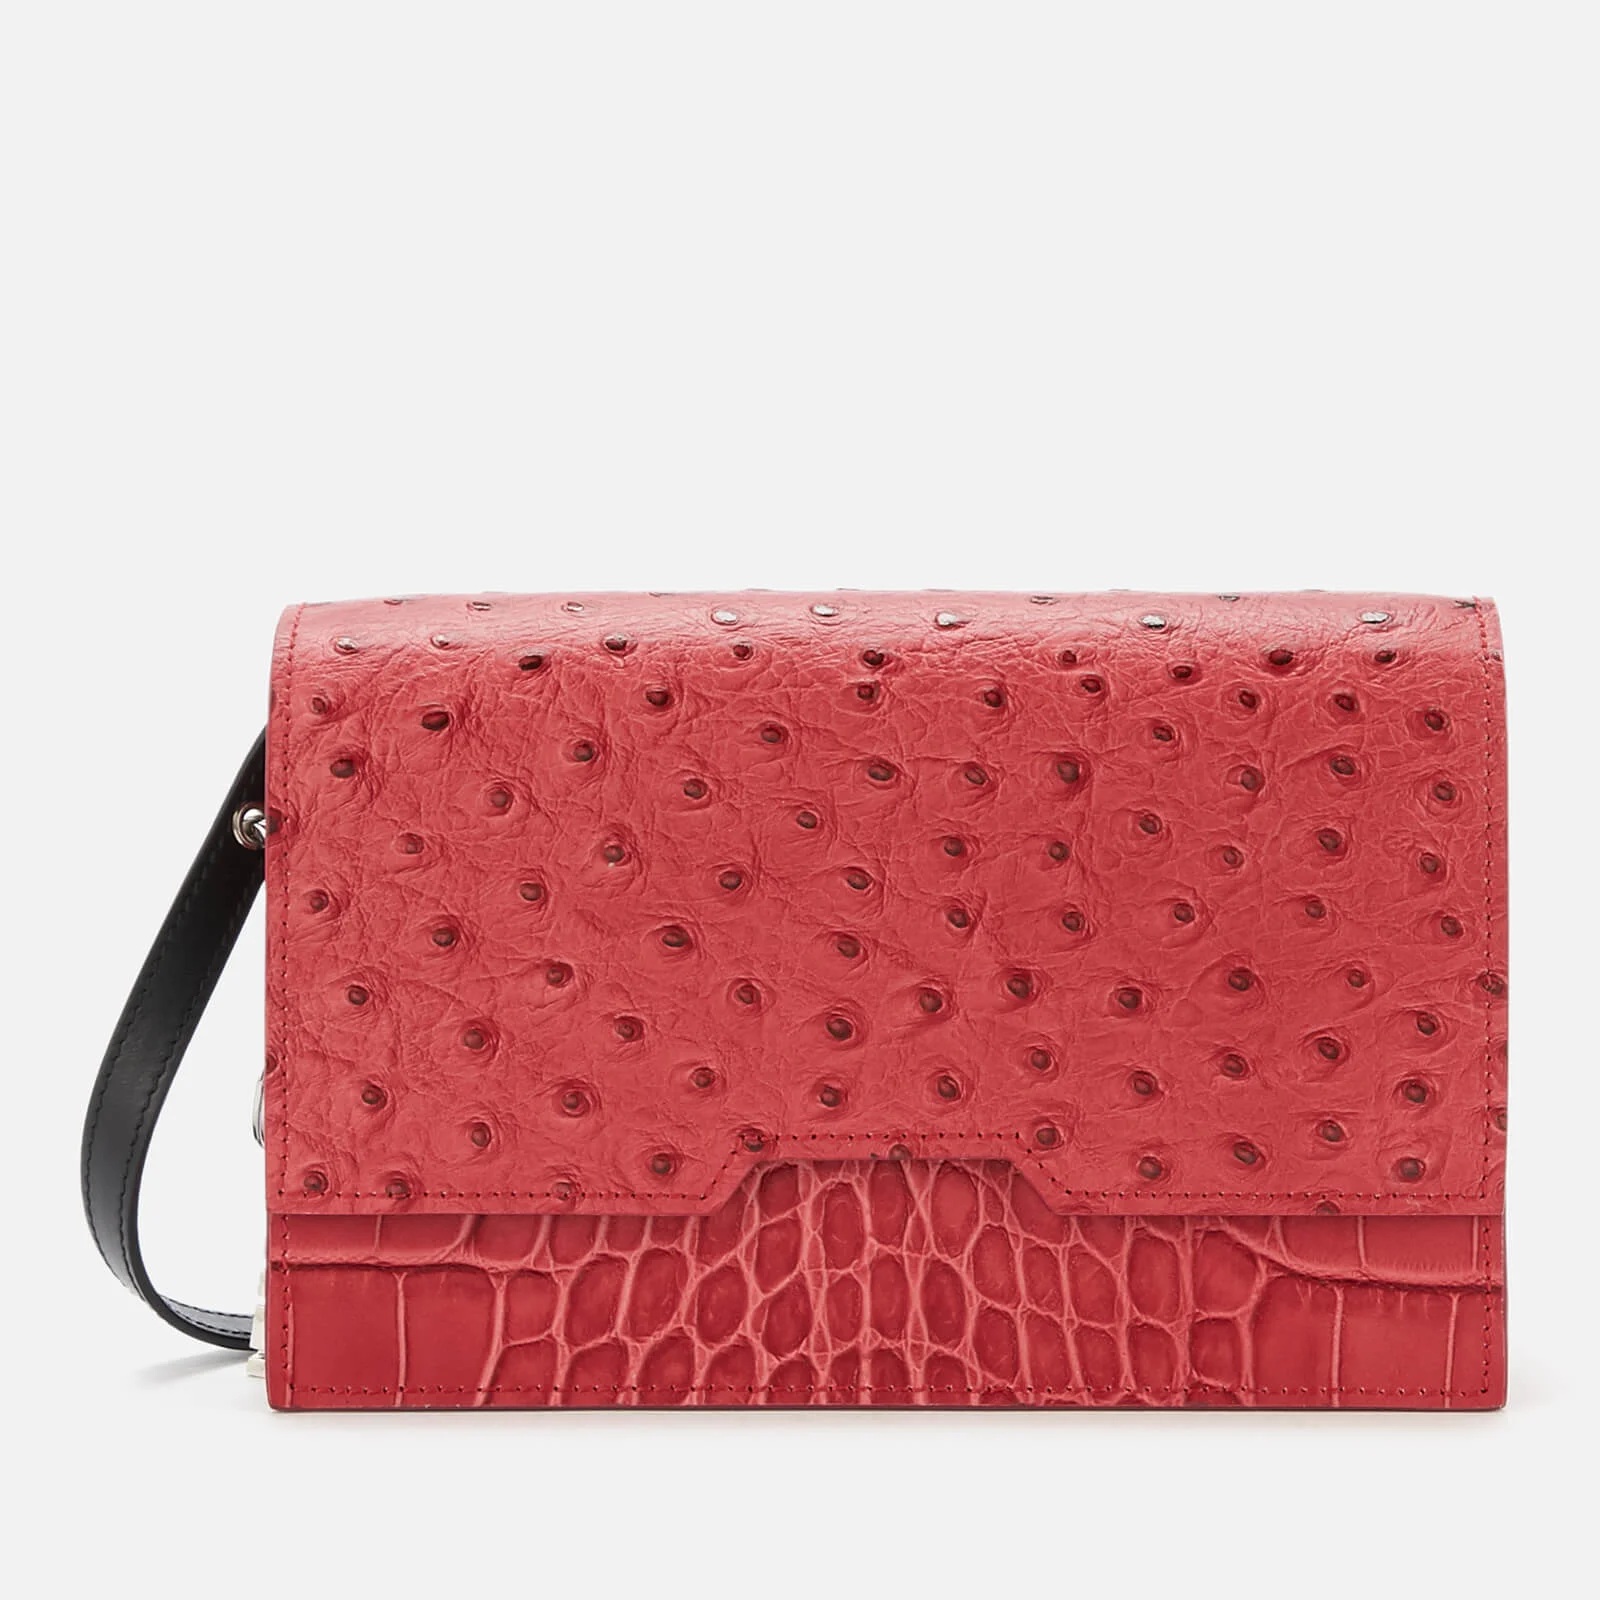 Vivienne Westwood Anglomania Women's Susie Mini Cross Body Bag - Red Image 1